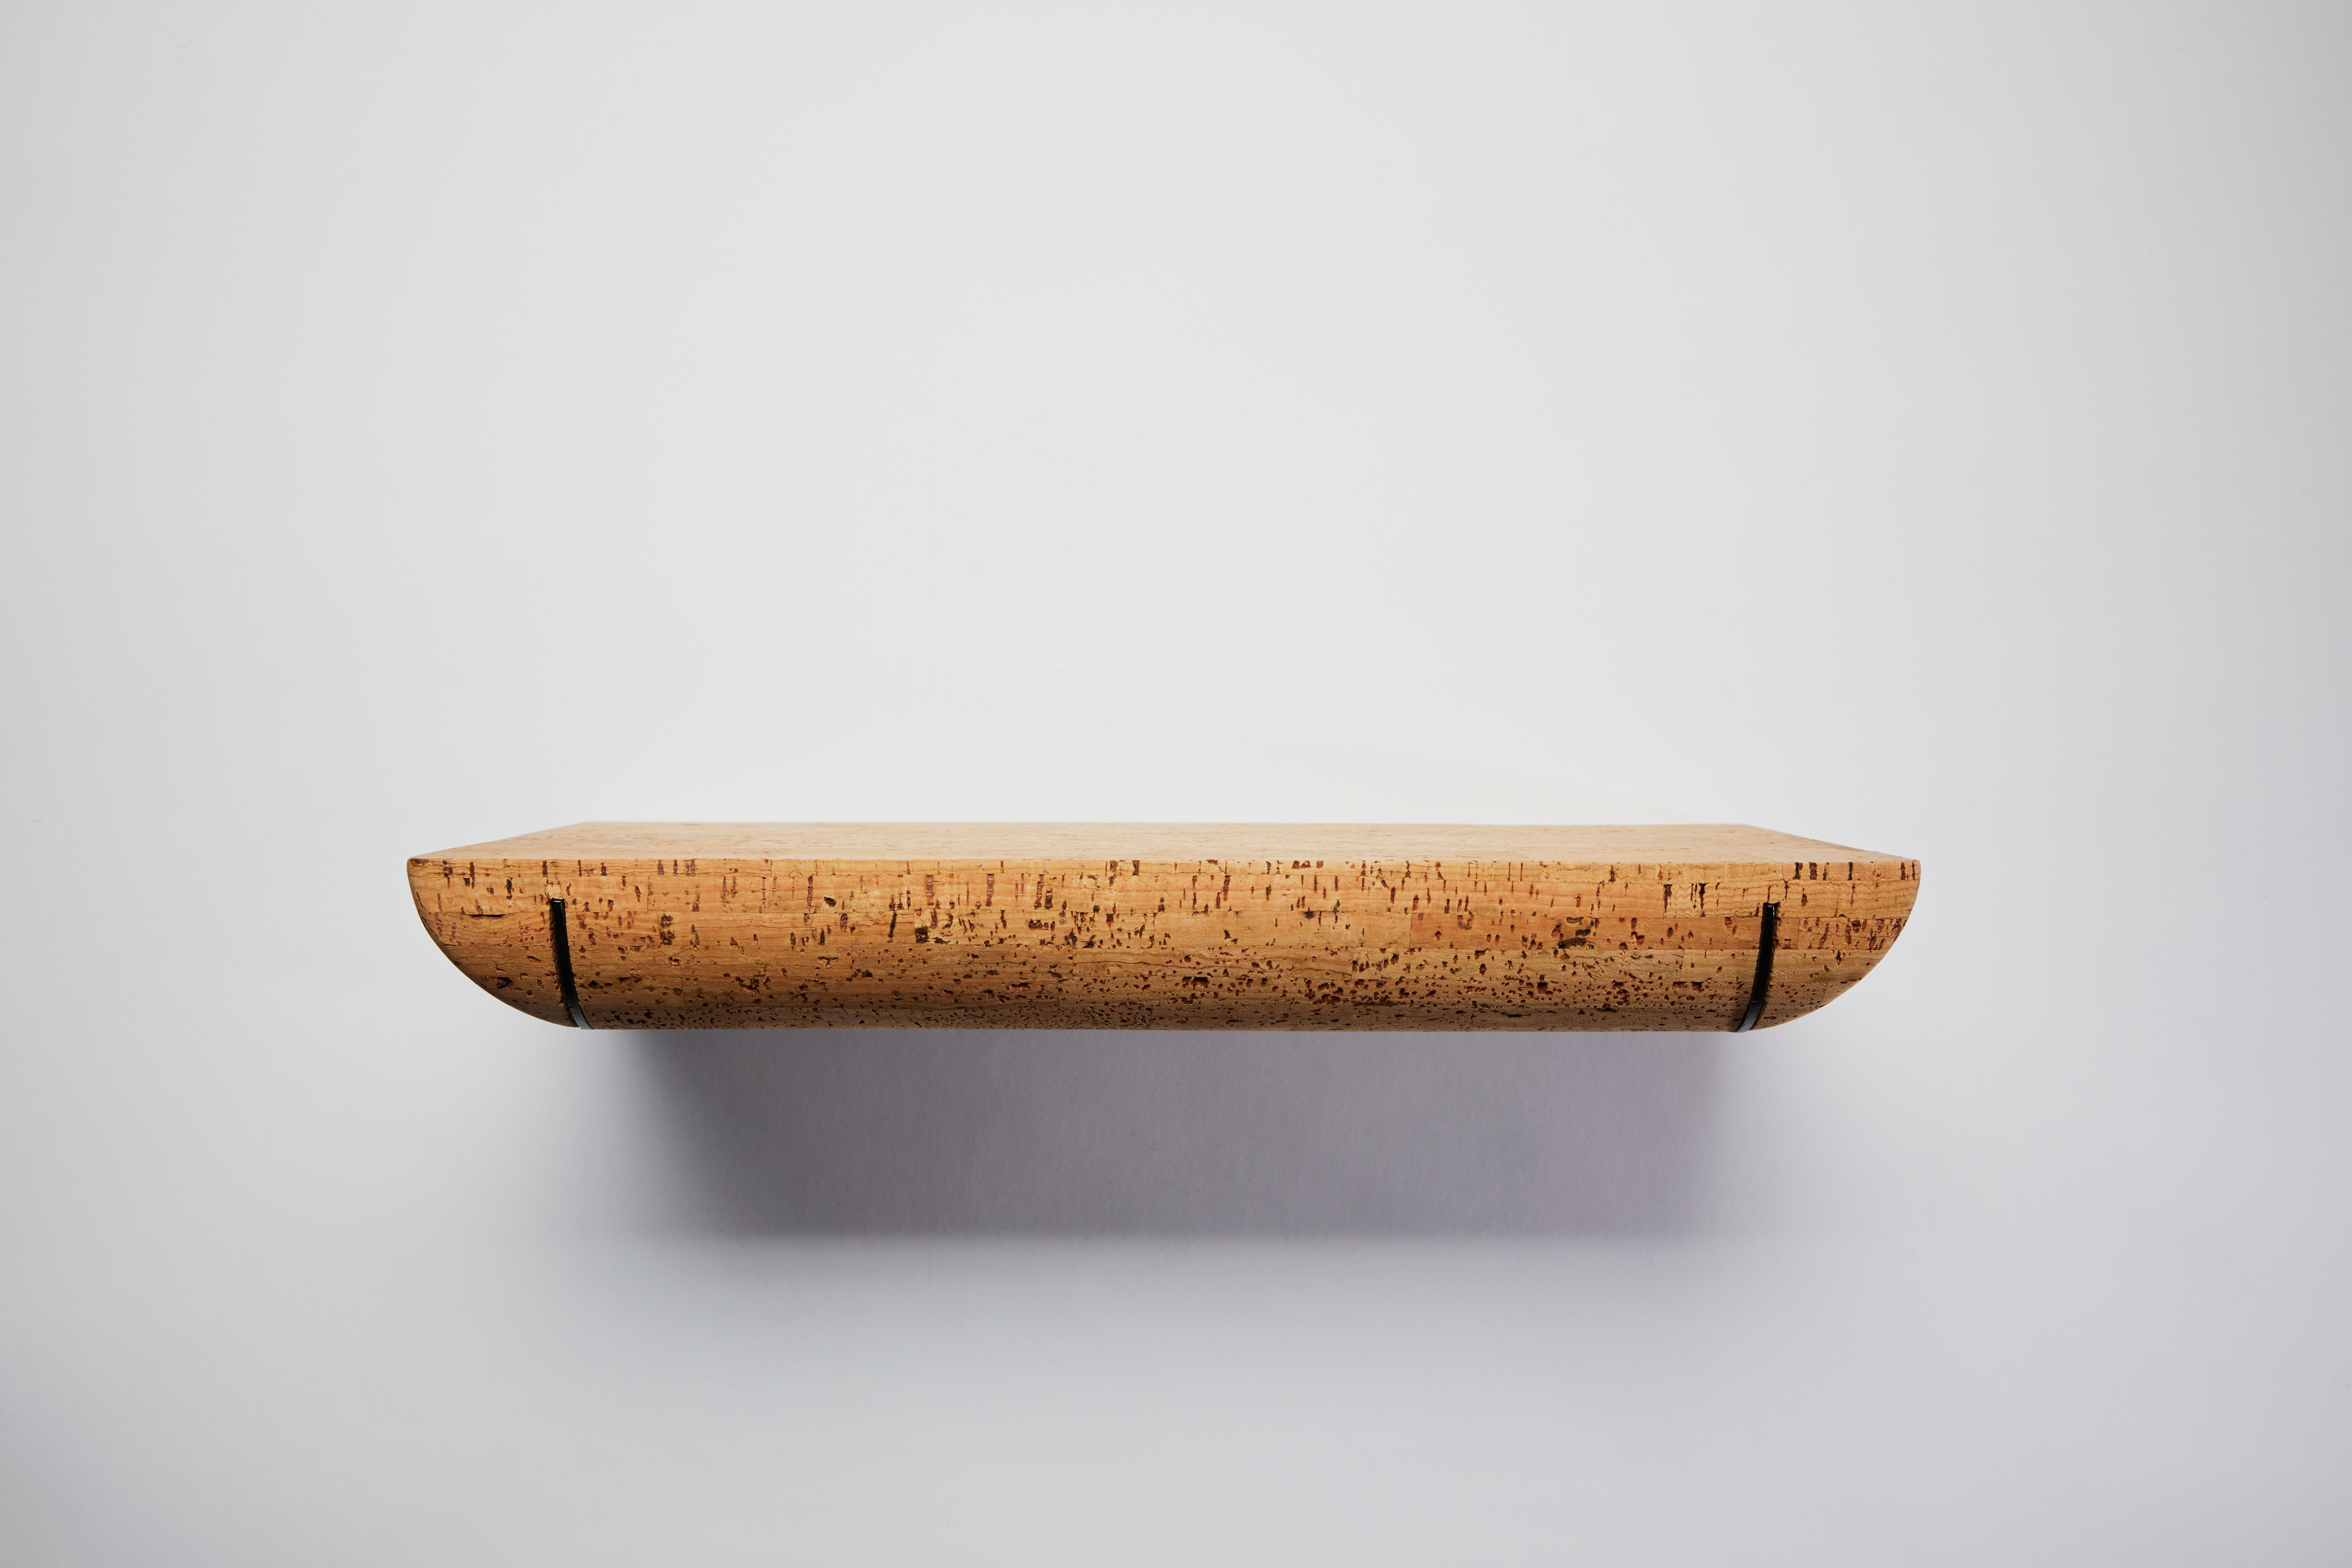 Mortaise wall shelf-400 by Clemence Birot
Dimensions: 40 x 25 x 6,5 cm
Materials: cork, metal.

Clemence Birot started her career in Copenhagen, Denmark, and discovered a design practice closely related to craftsmanship. The latter plays an